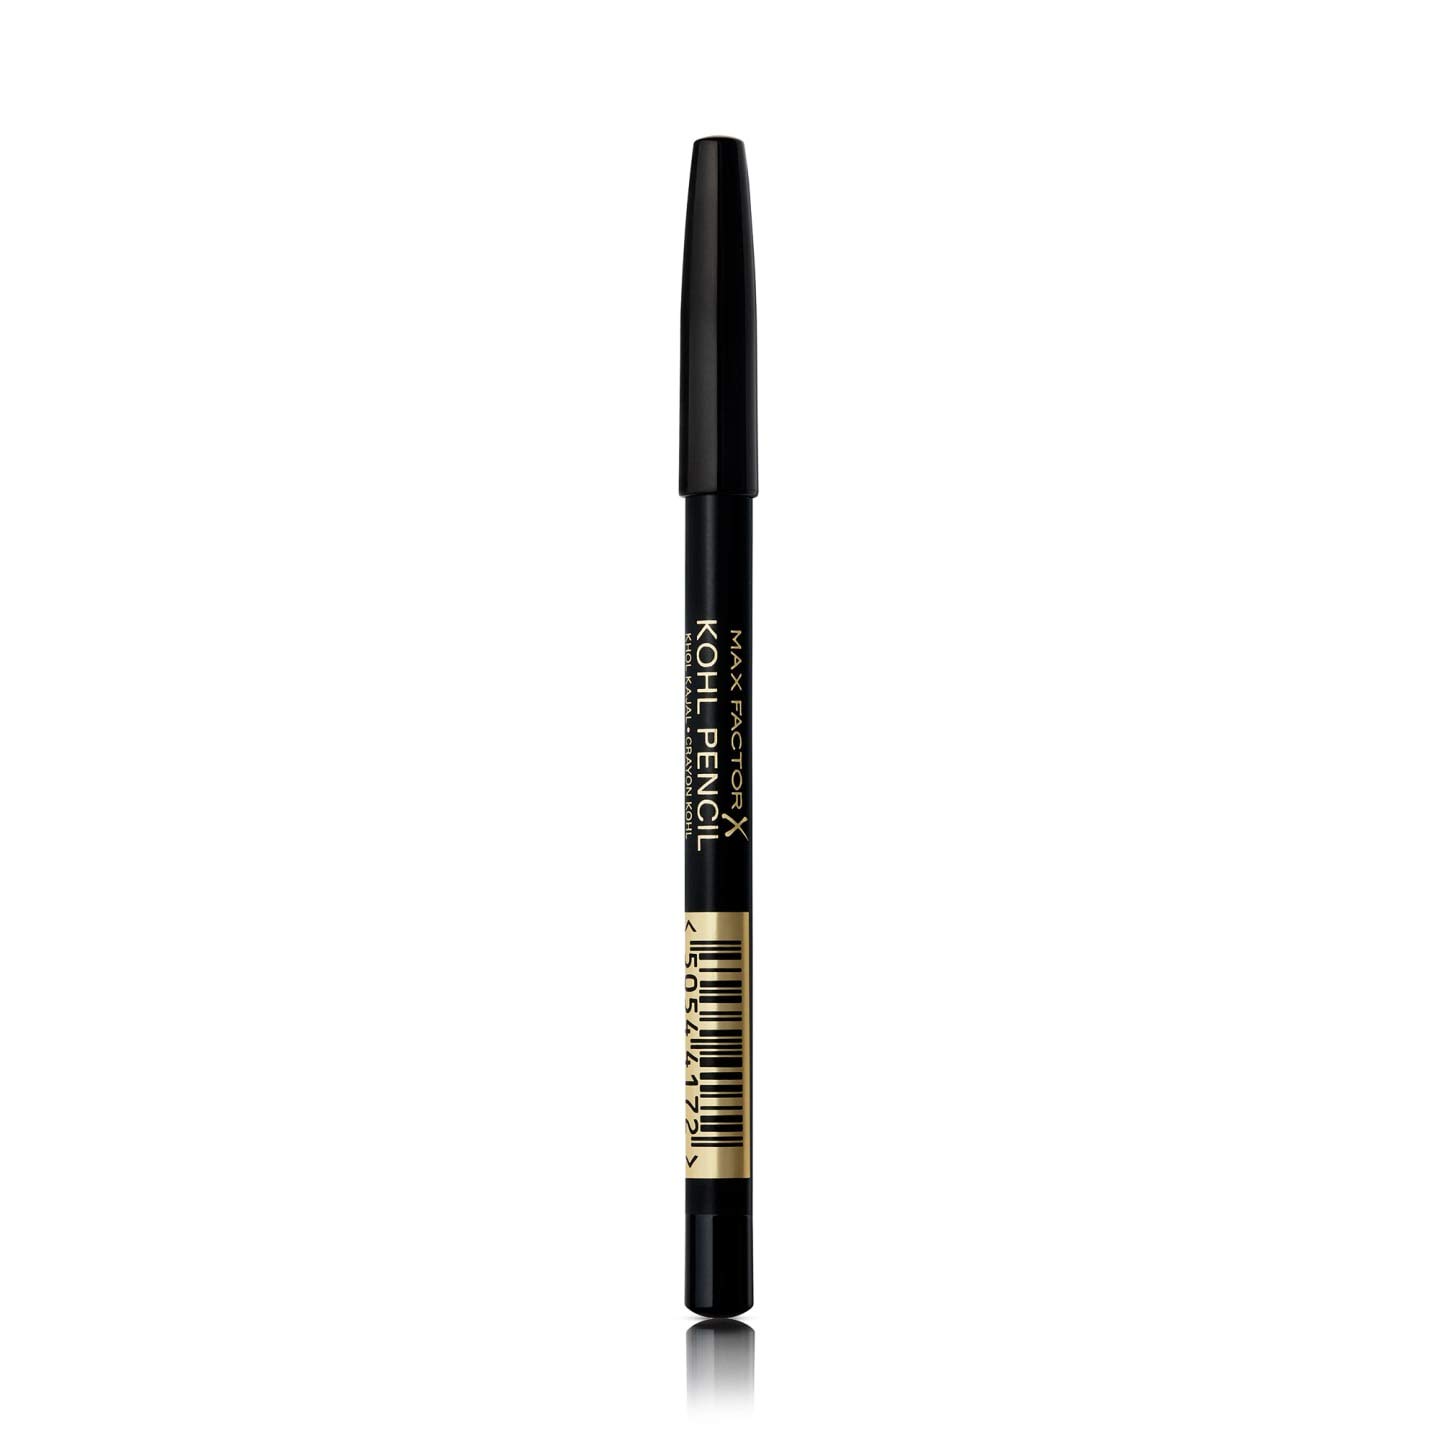 Image of Max Factor - Kohl Pencil